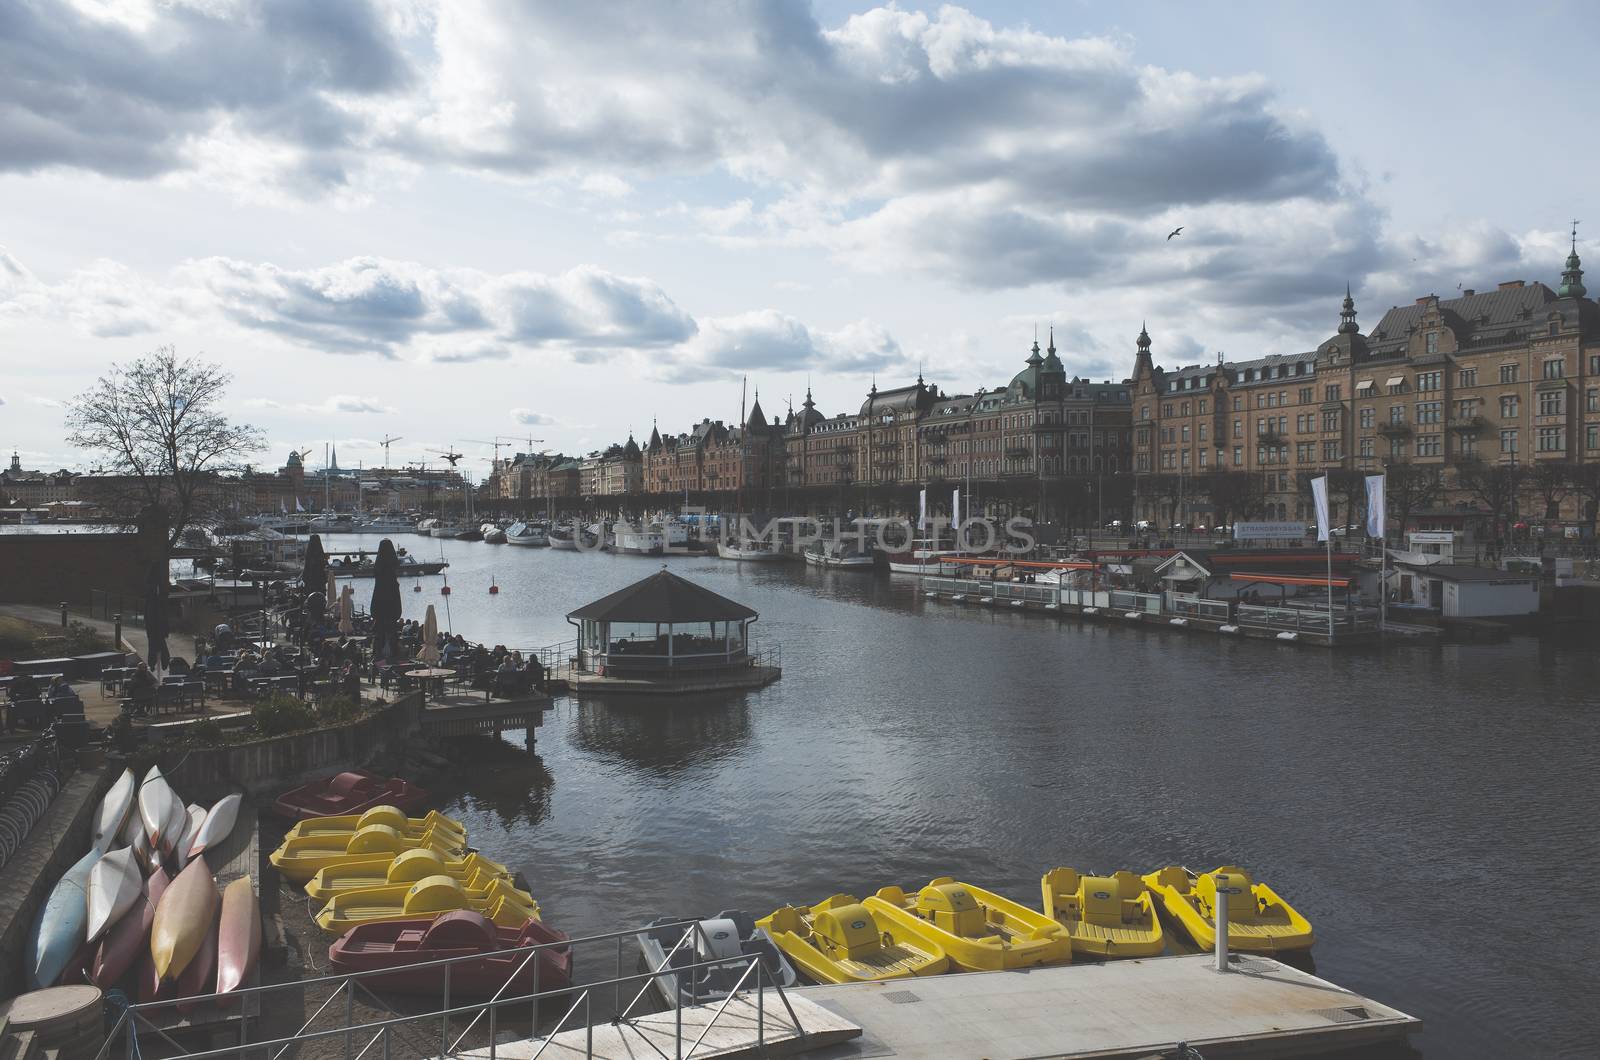 April 22, 2018, Stockholm, Sweden. Marina for yachts and catamarans in the center of Stockholm.